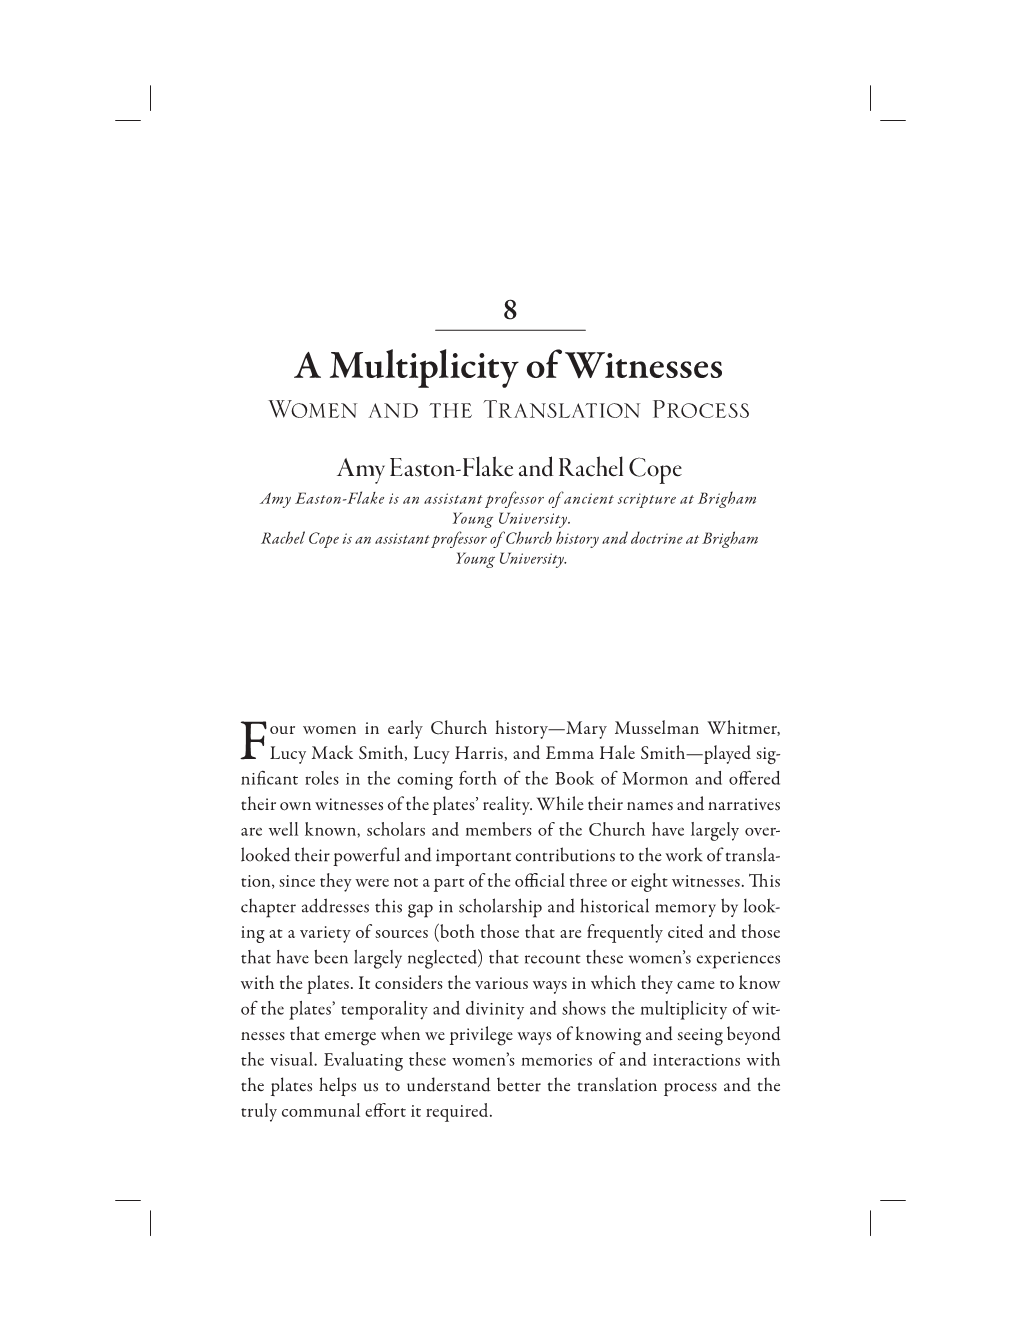 A Multiplicity of Witnesses Women and the Translation Process